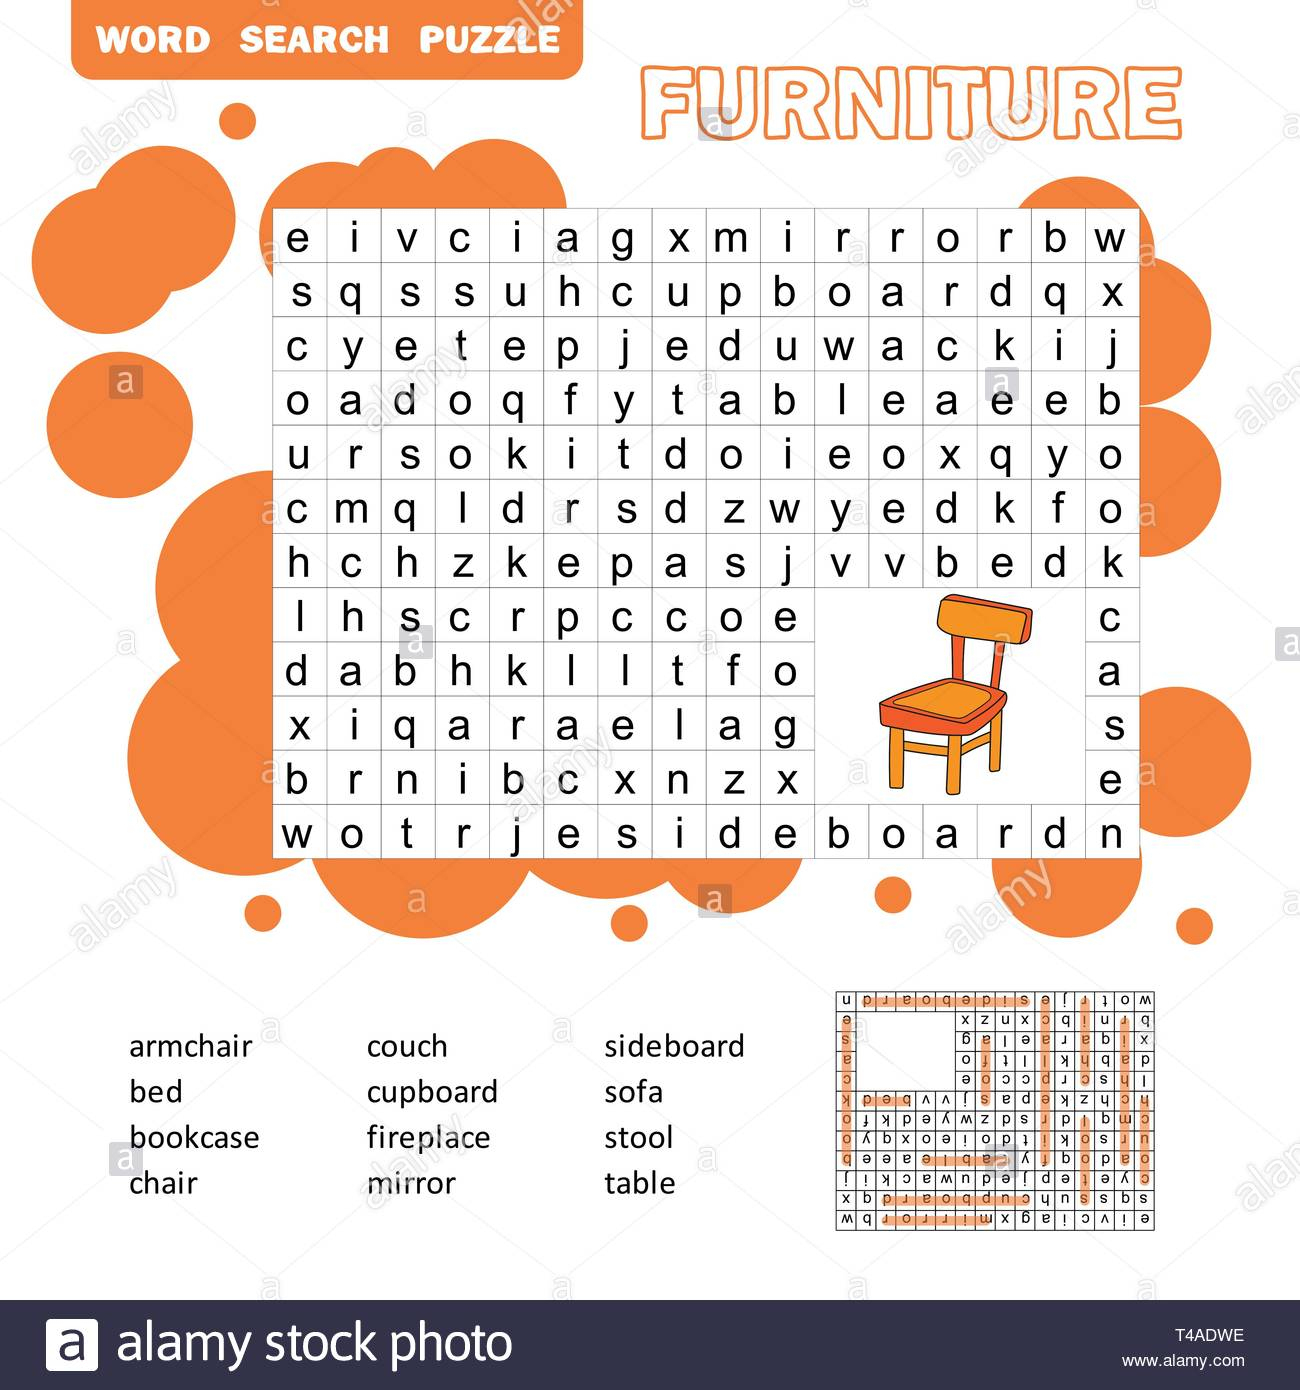 Crossword - Living Room Furniture - Learning English Words. Word - Printable Crosswords To Learn English